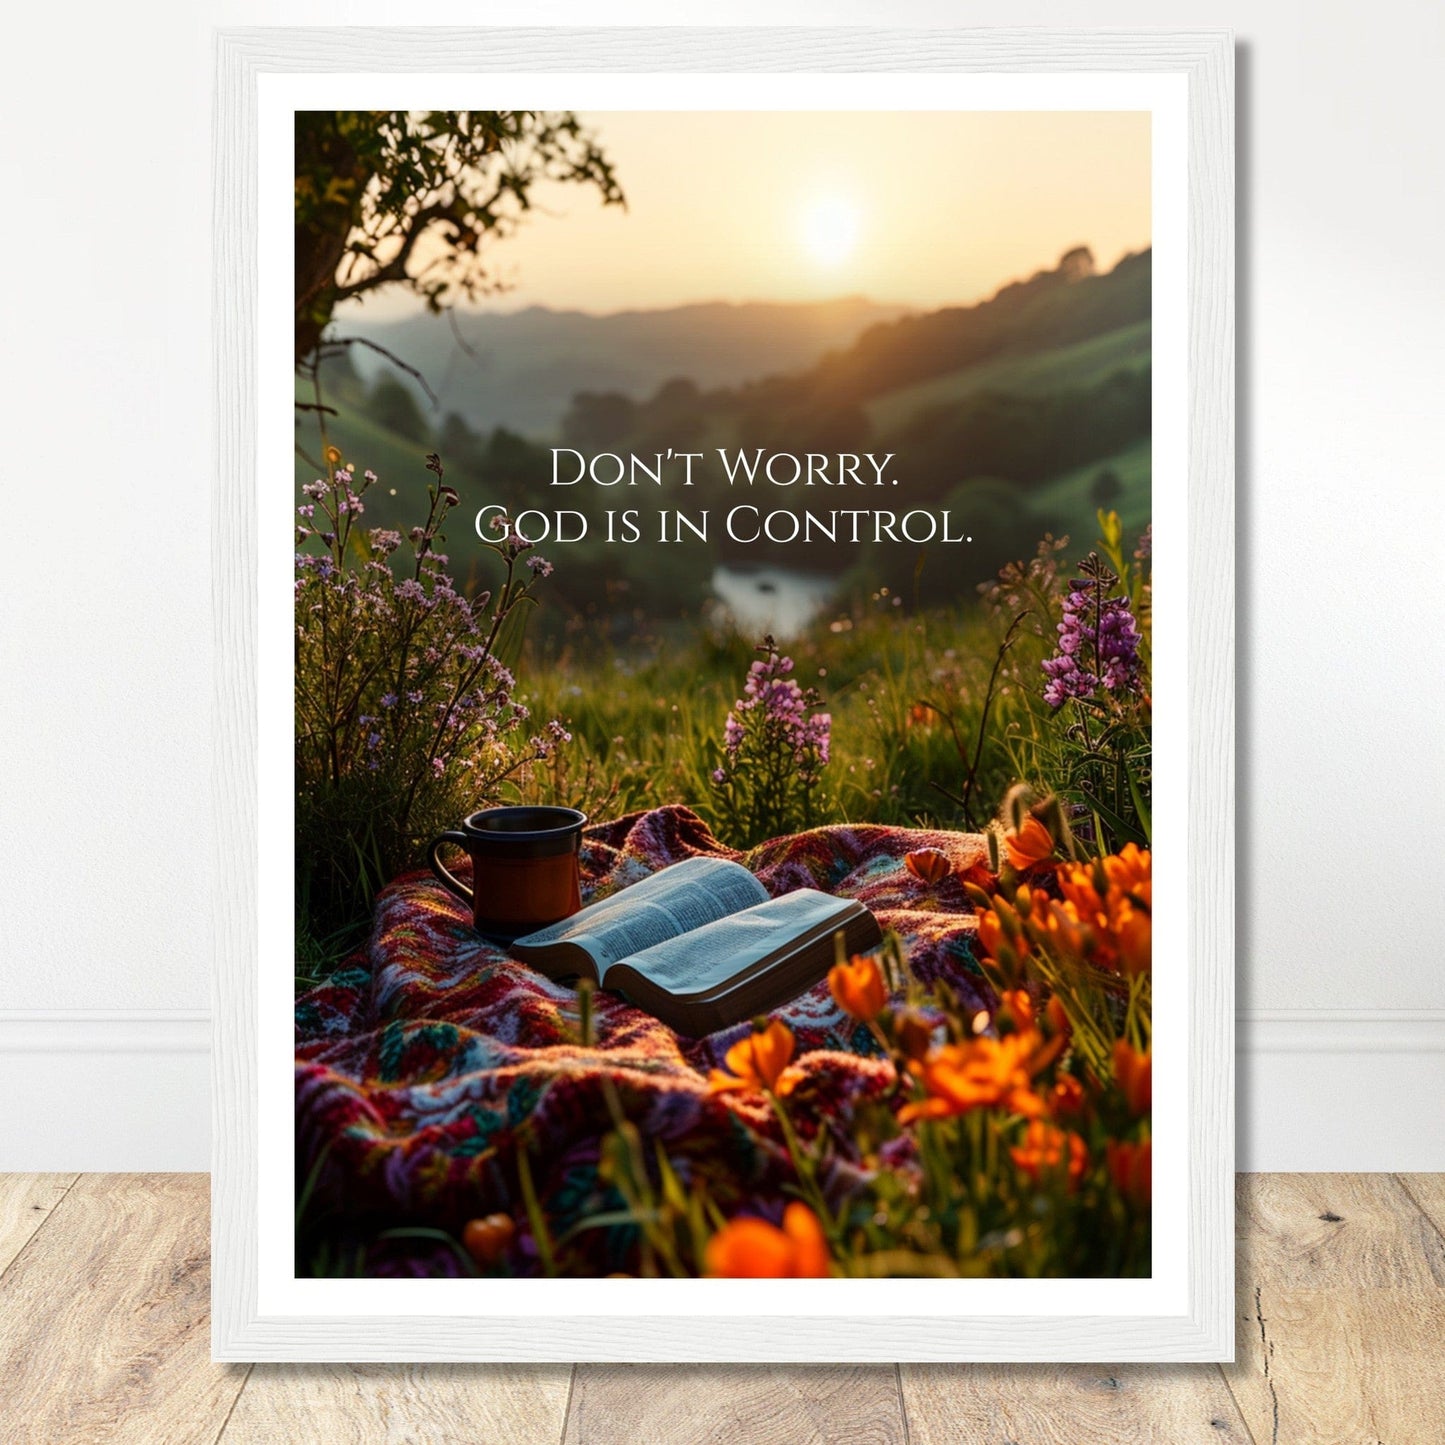 Coffee With My Father Print Material 30x40 cm / 12x16″ / White frame Premium Matte Paper Wooden Framed Poster